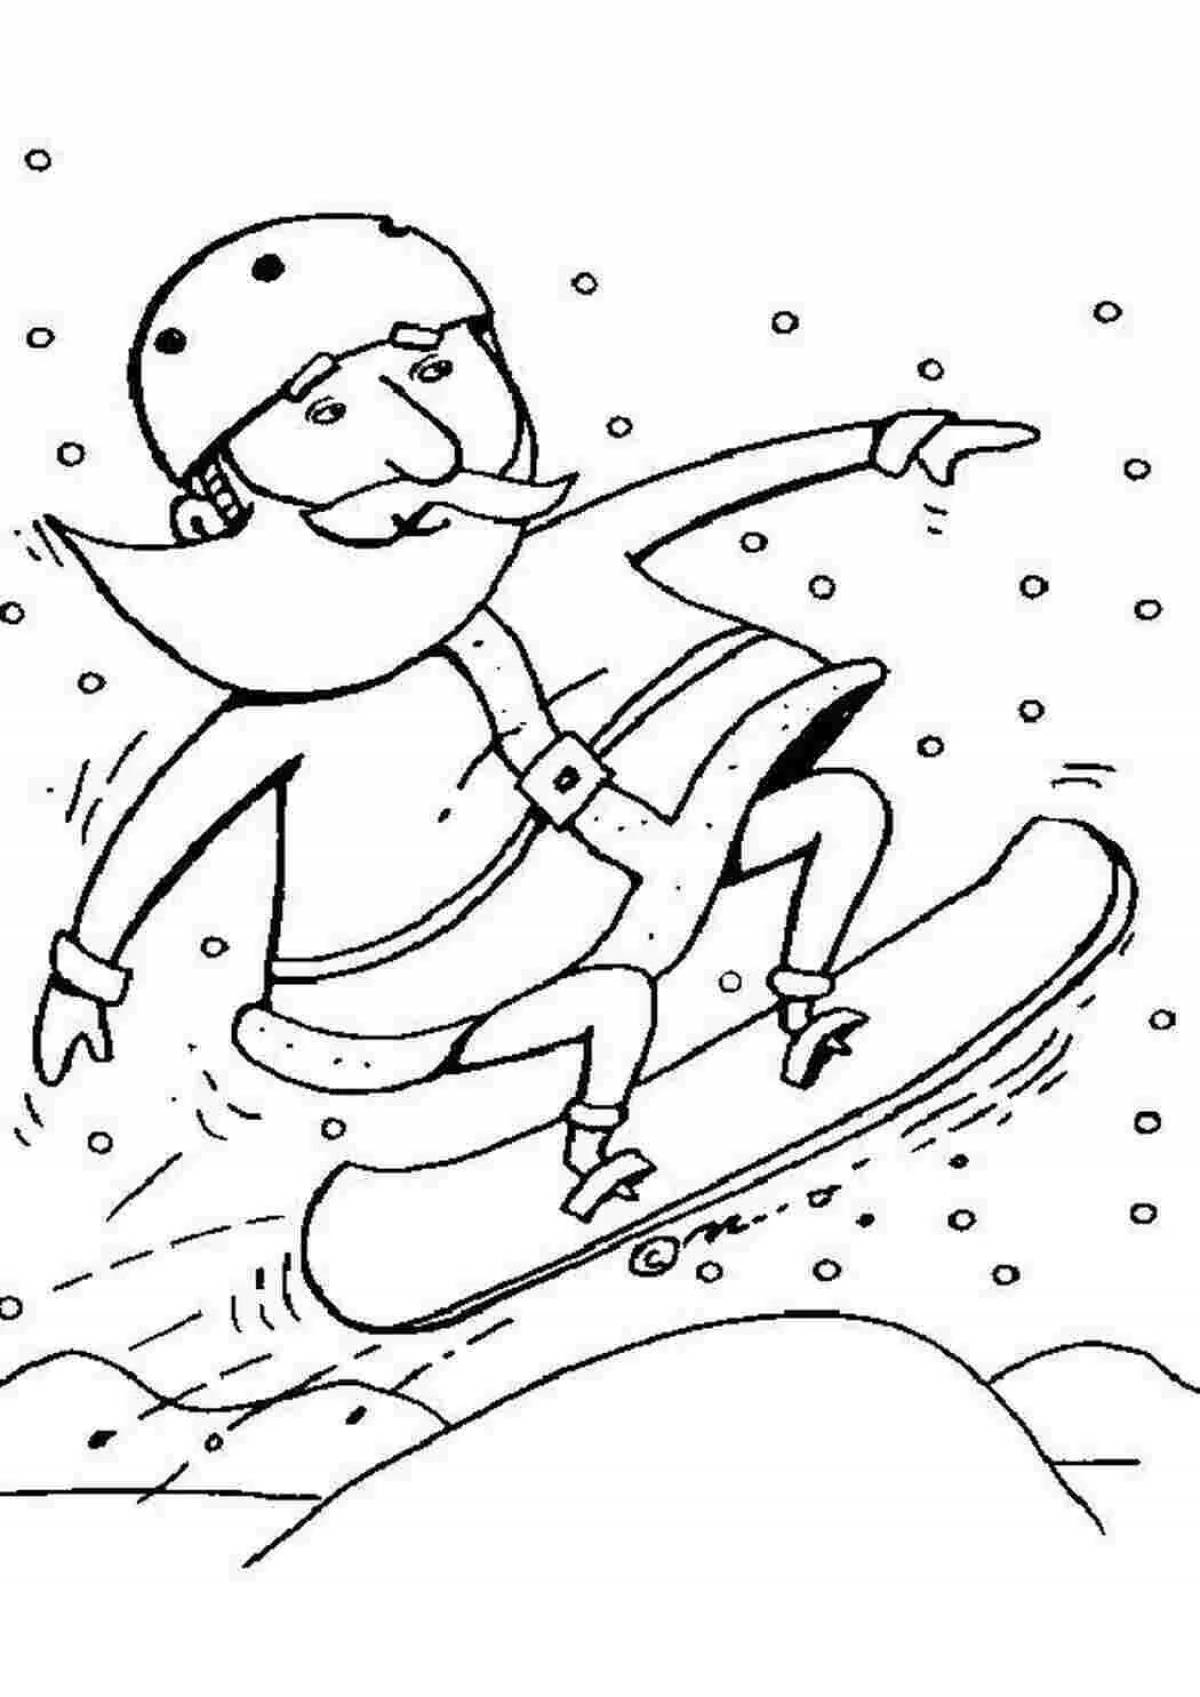 Alive snowboarder coloring pages for kids